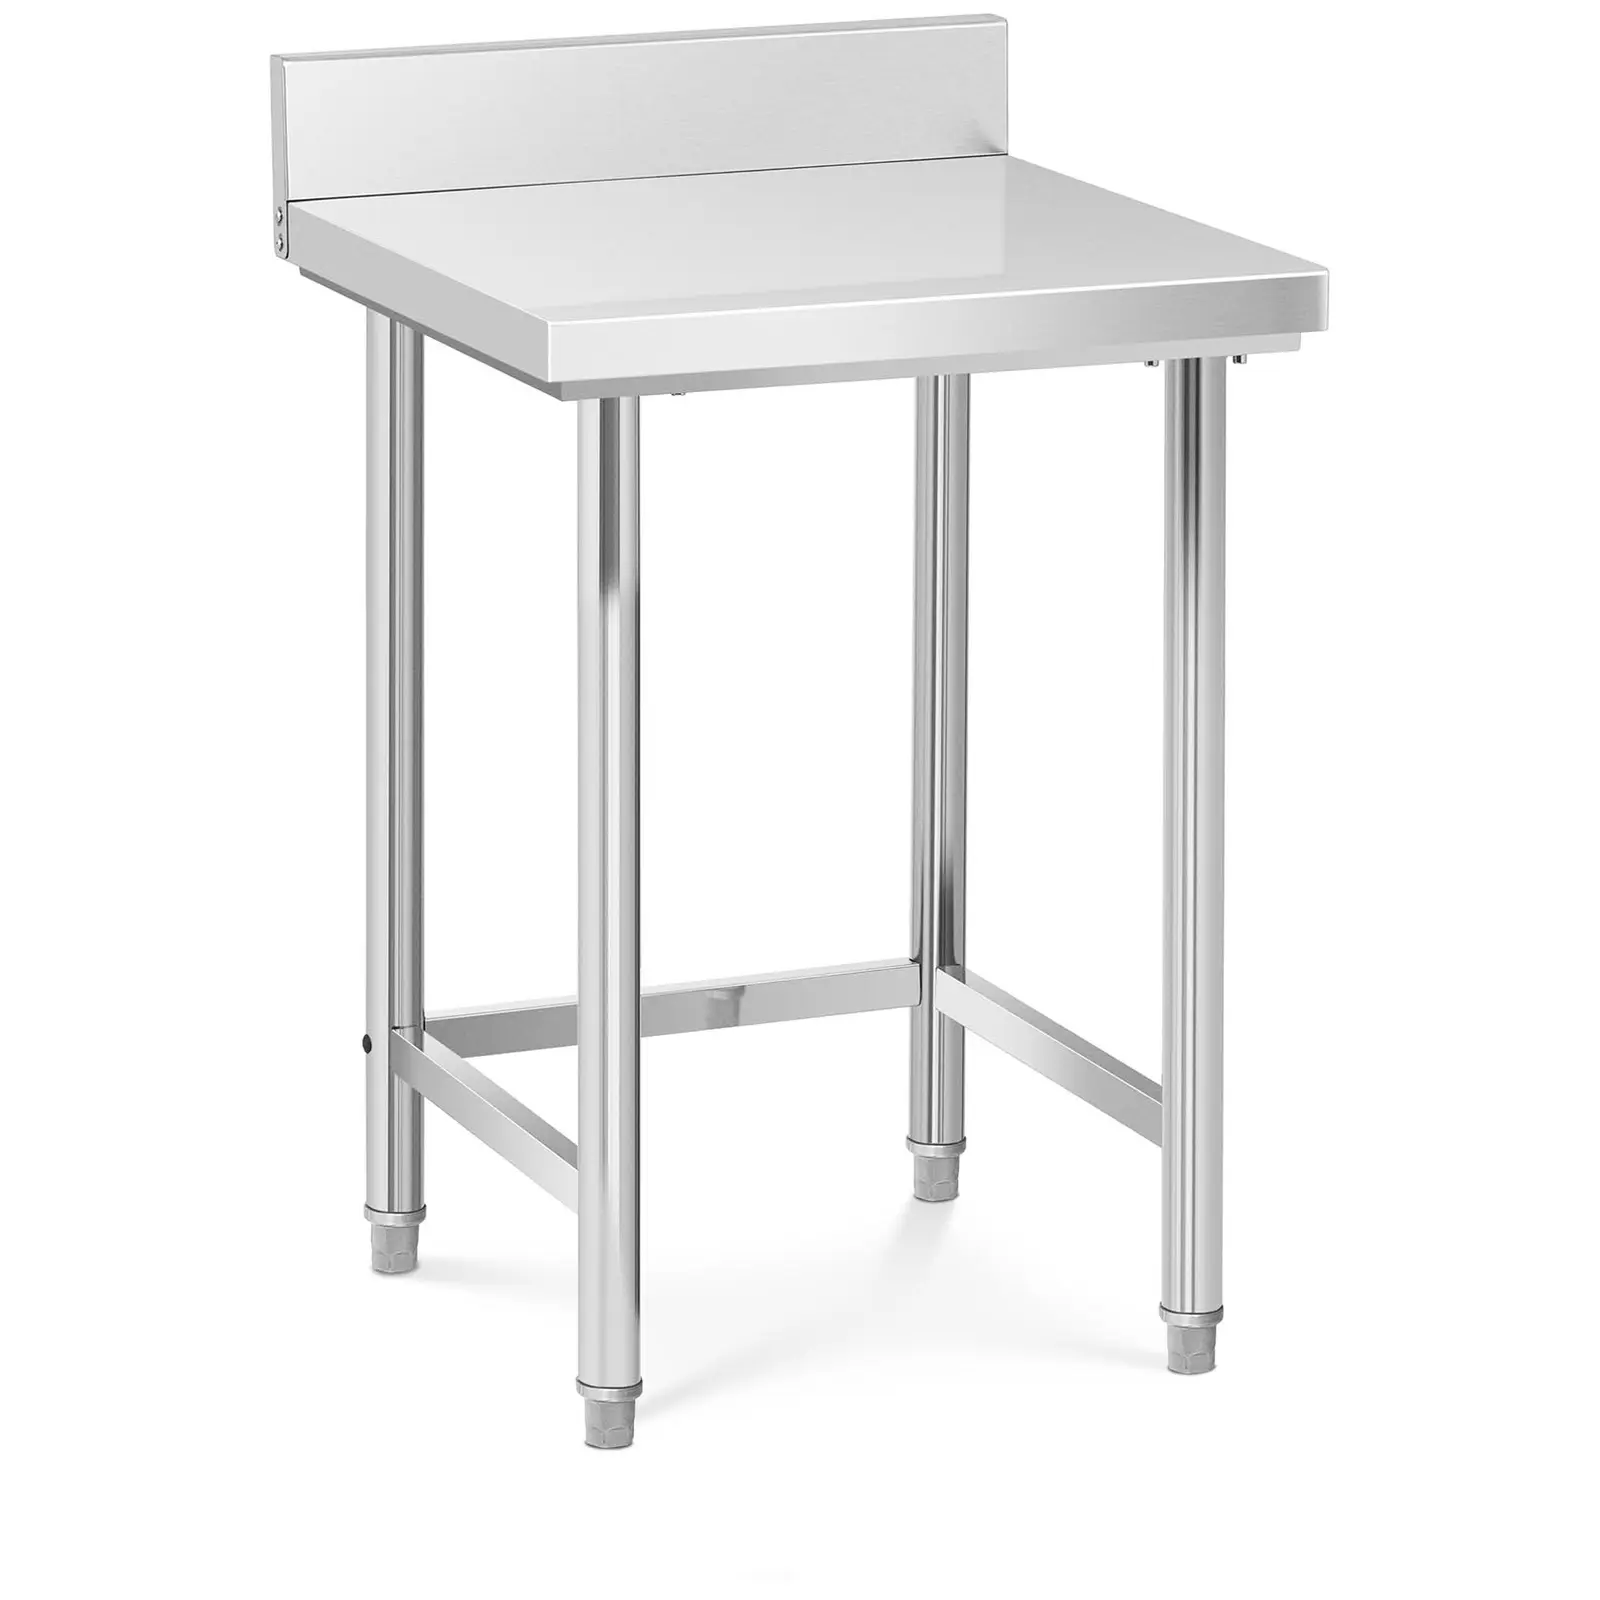 Stainless Steel Work Table - 64 x 64 cm - upstand - 200 kg capacity